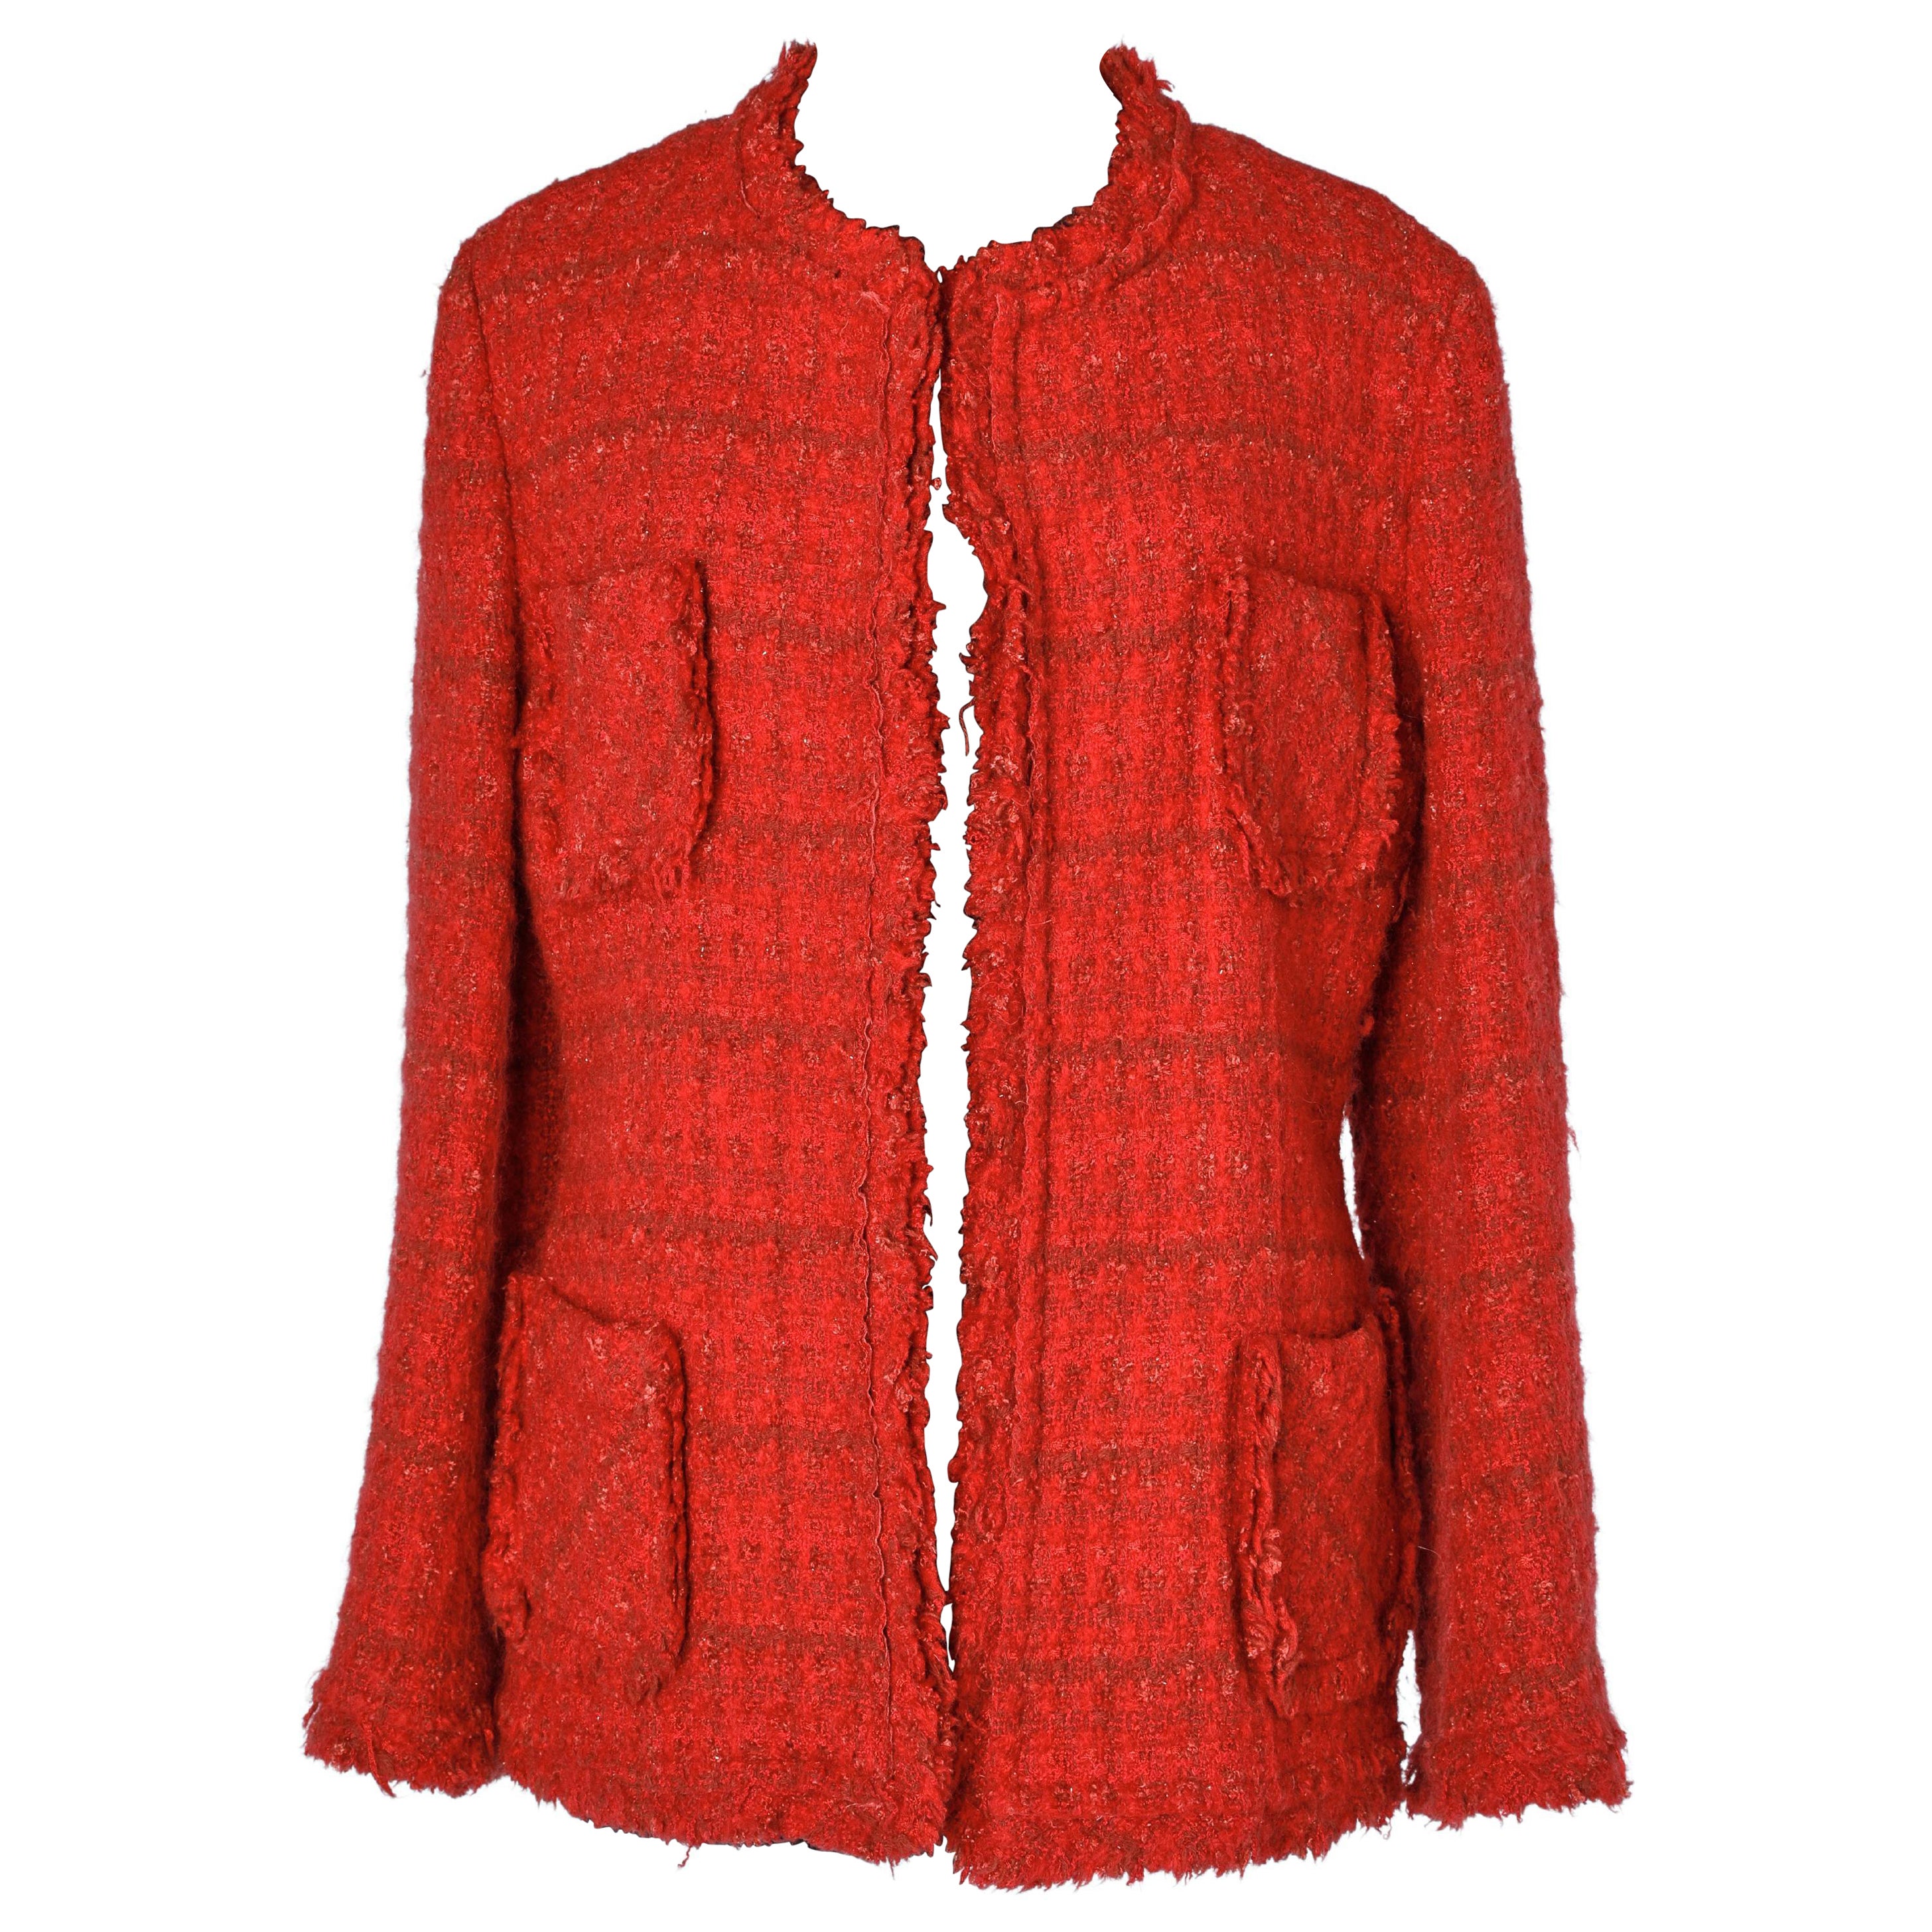 Red wool jacket " Tribute to Chanel" Junya Watanabe Comme des Garçons 